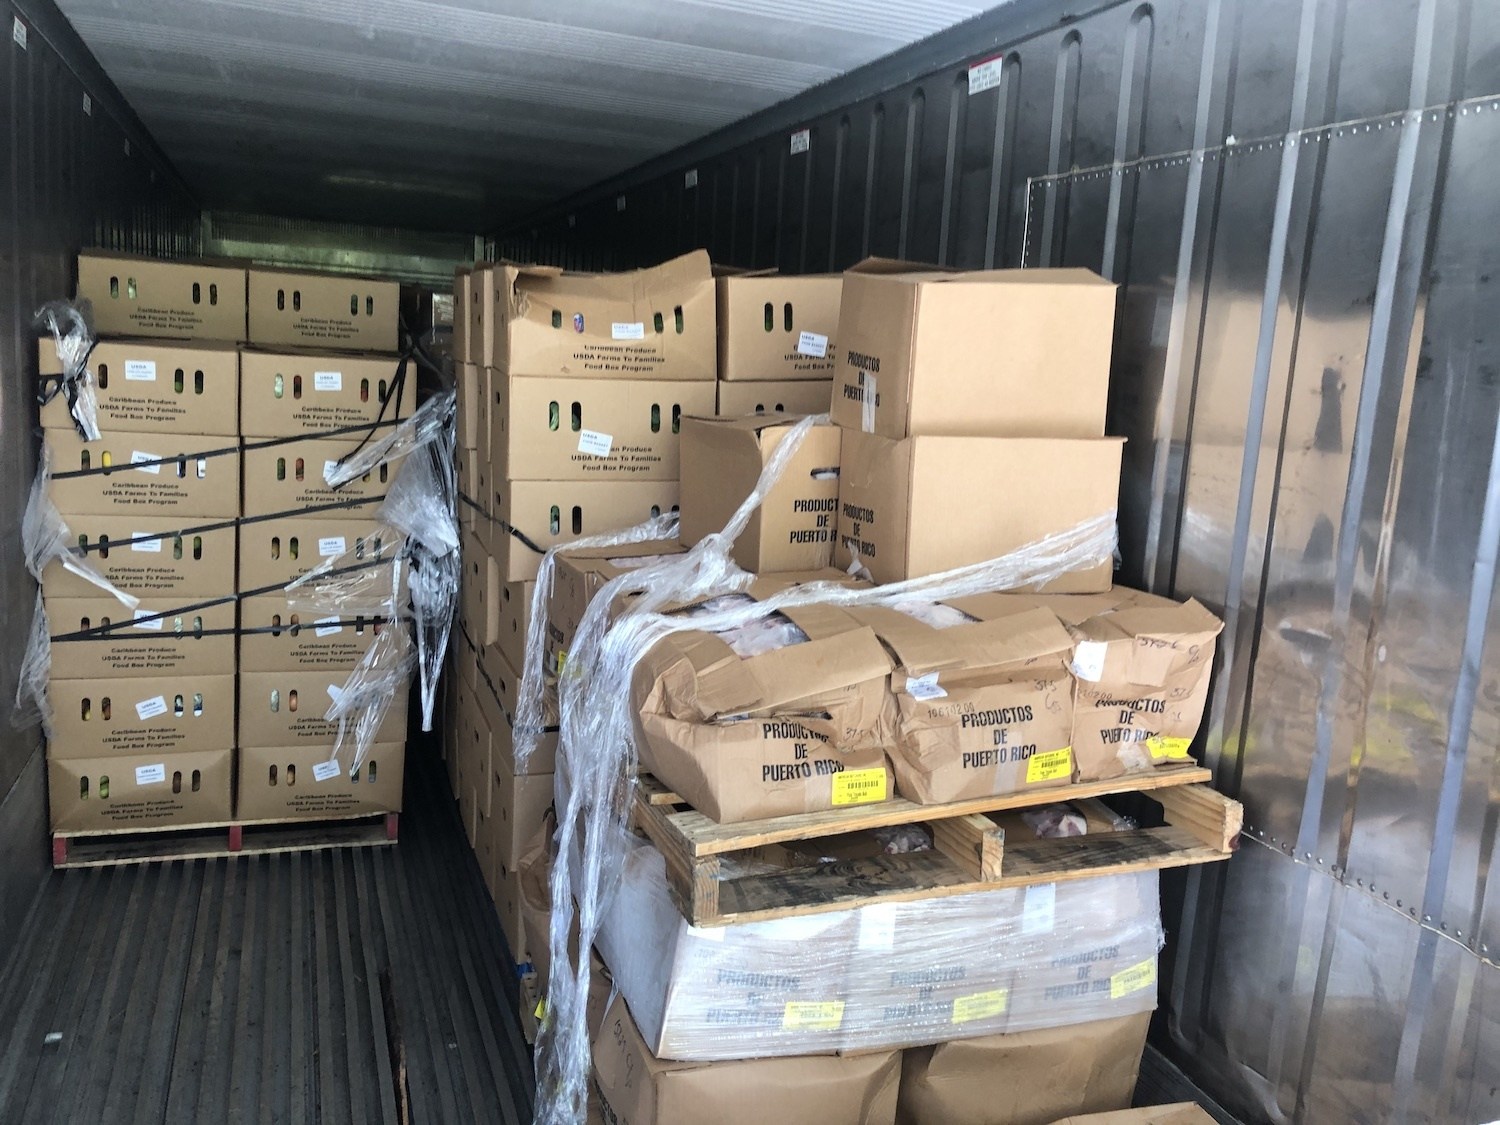 Puerto Rico’s biggest produce distributor delivers food boxes to Manuel A. Perez Housing Project as part of a USDA’s Farmers to Families Food Box program June 2020